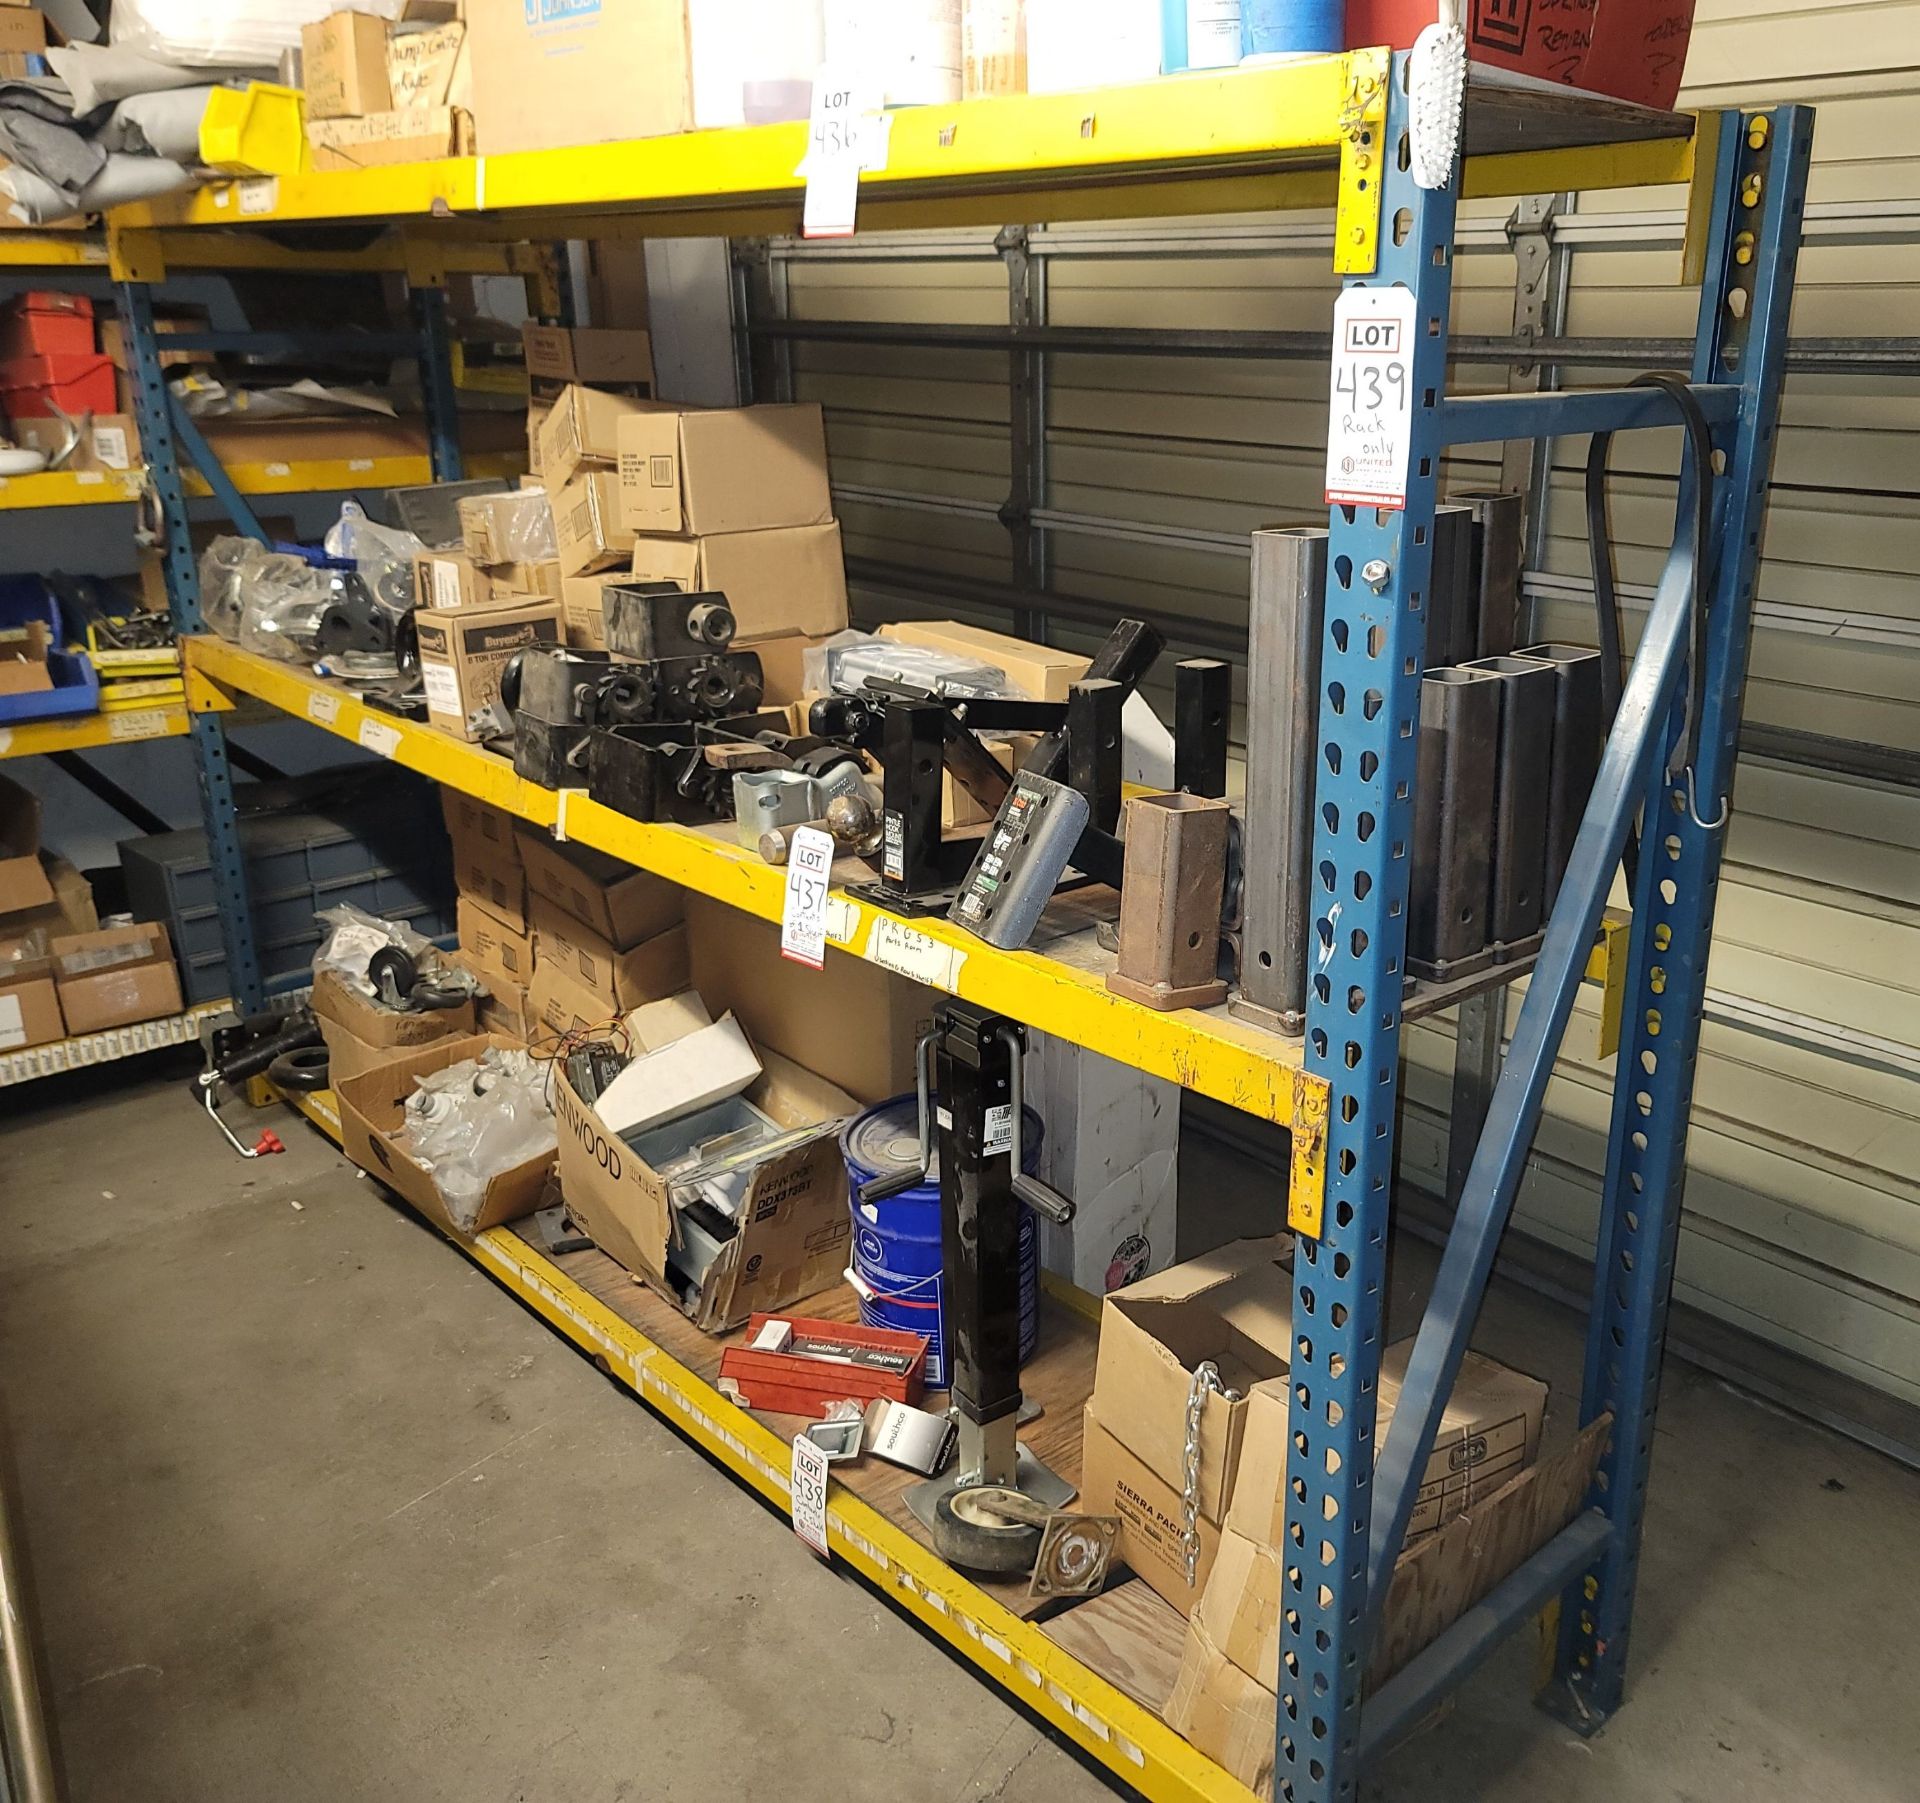 HEAVY DUTY SHELF UNIT, 10' X 2' X 6' HT, CONTENTS NOT INCLUDED, (DELAYED PICKUP UNTIL JUNE 23)